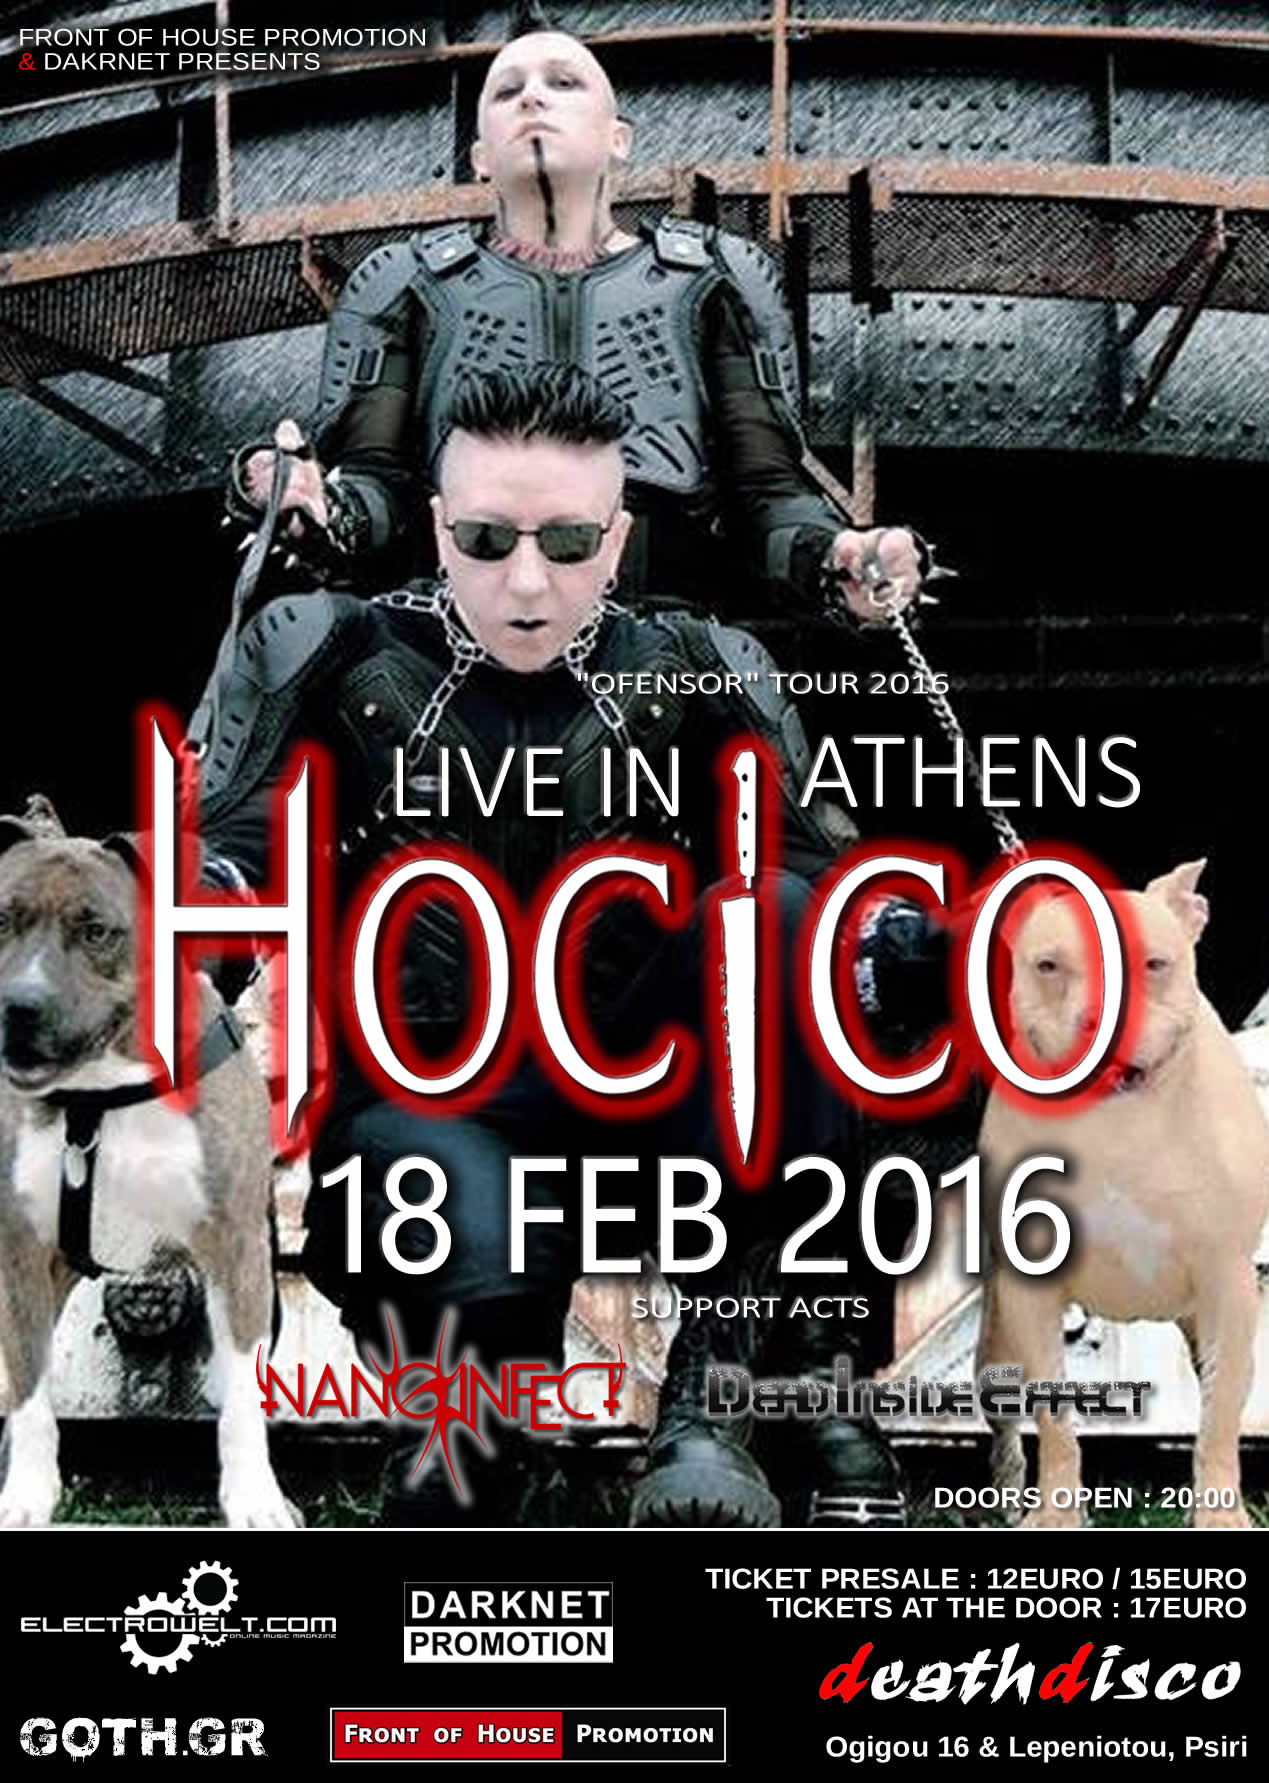 18.02.2016 – Hocico / Opening acts: Nano Infect / Dead Inside Effect